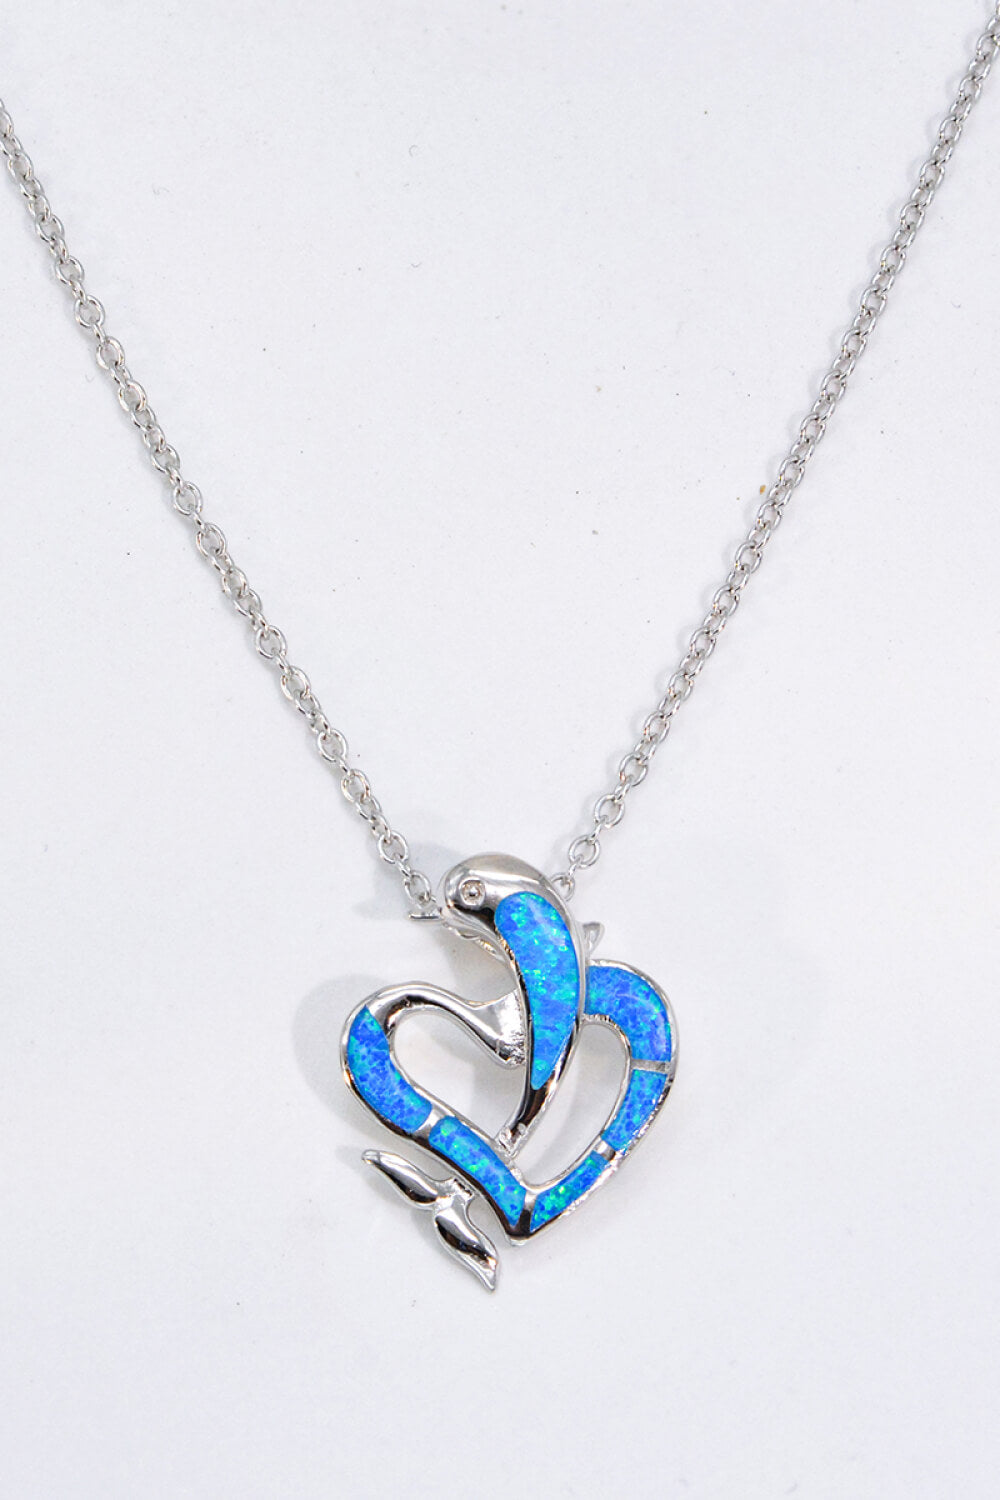 Opal Dolphin Heart Chain-Link Necklace - Necklaces - FITGGINS